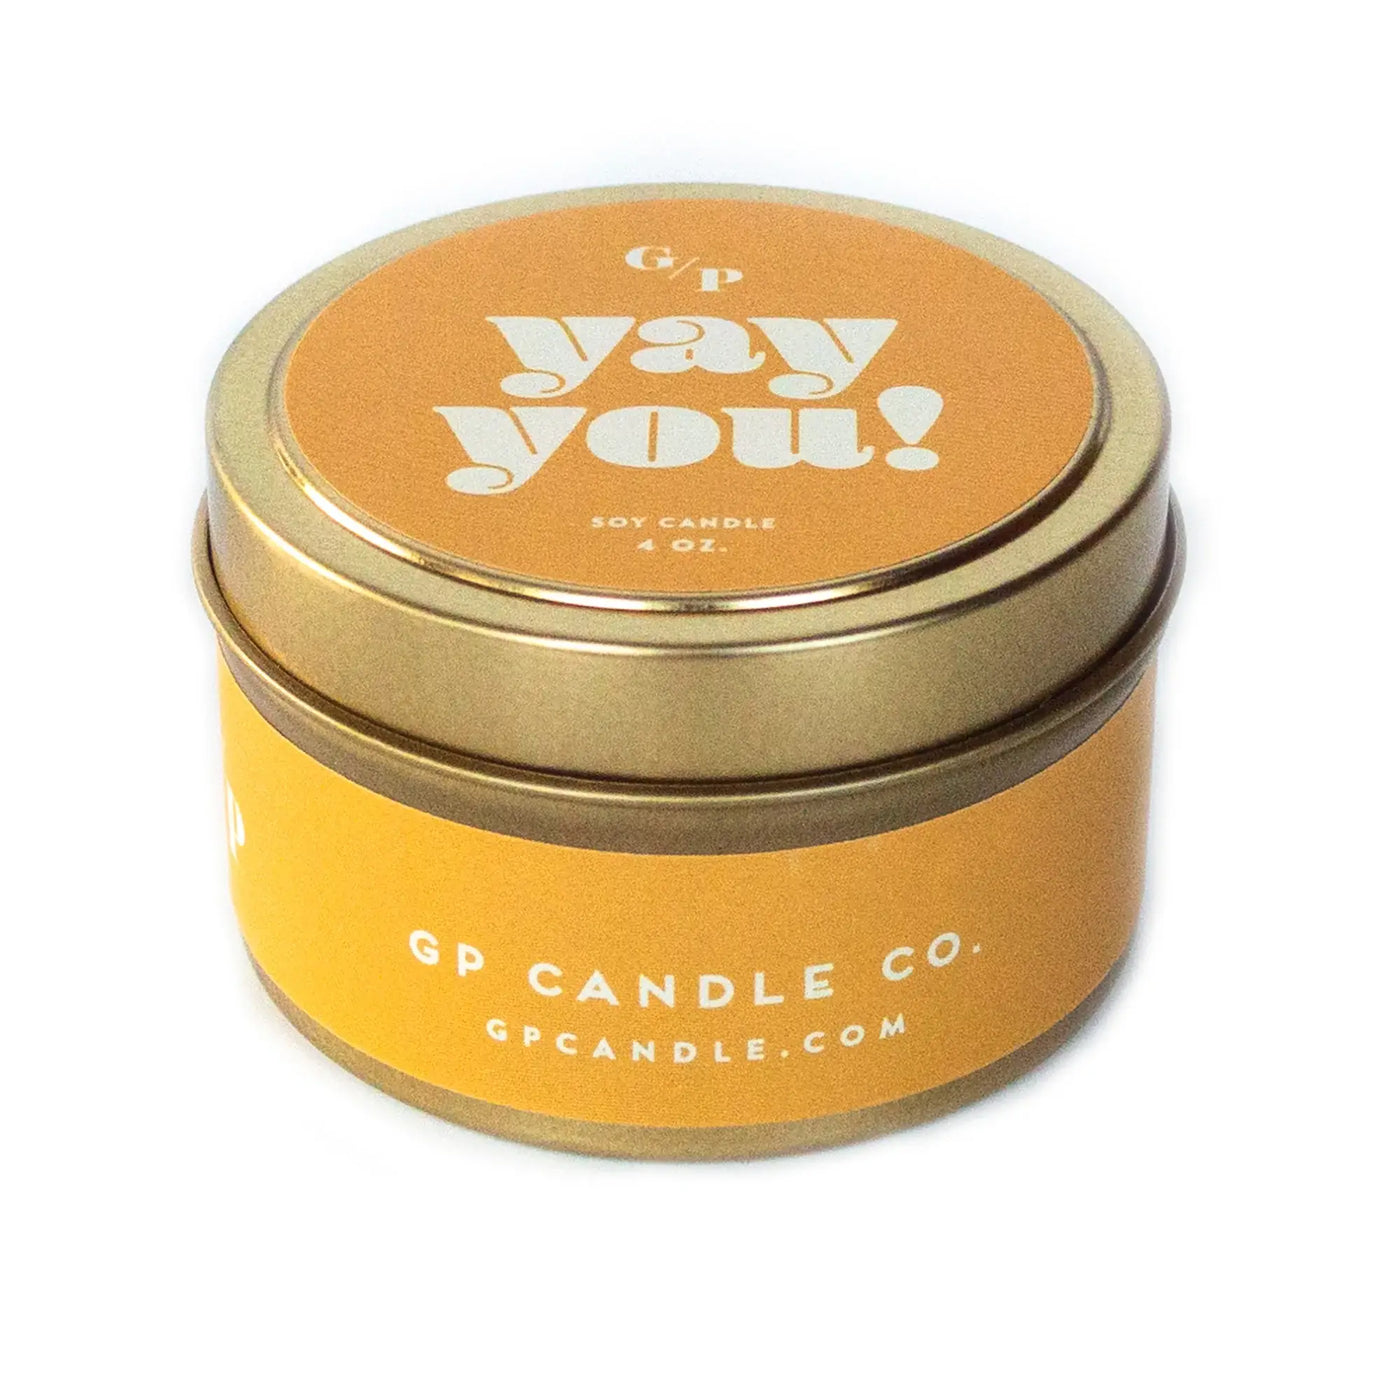 Yay You! Just Because 4 oz. Candle Tin